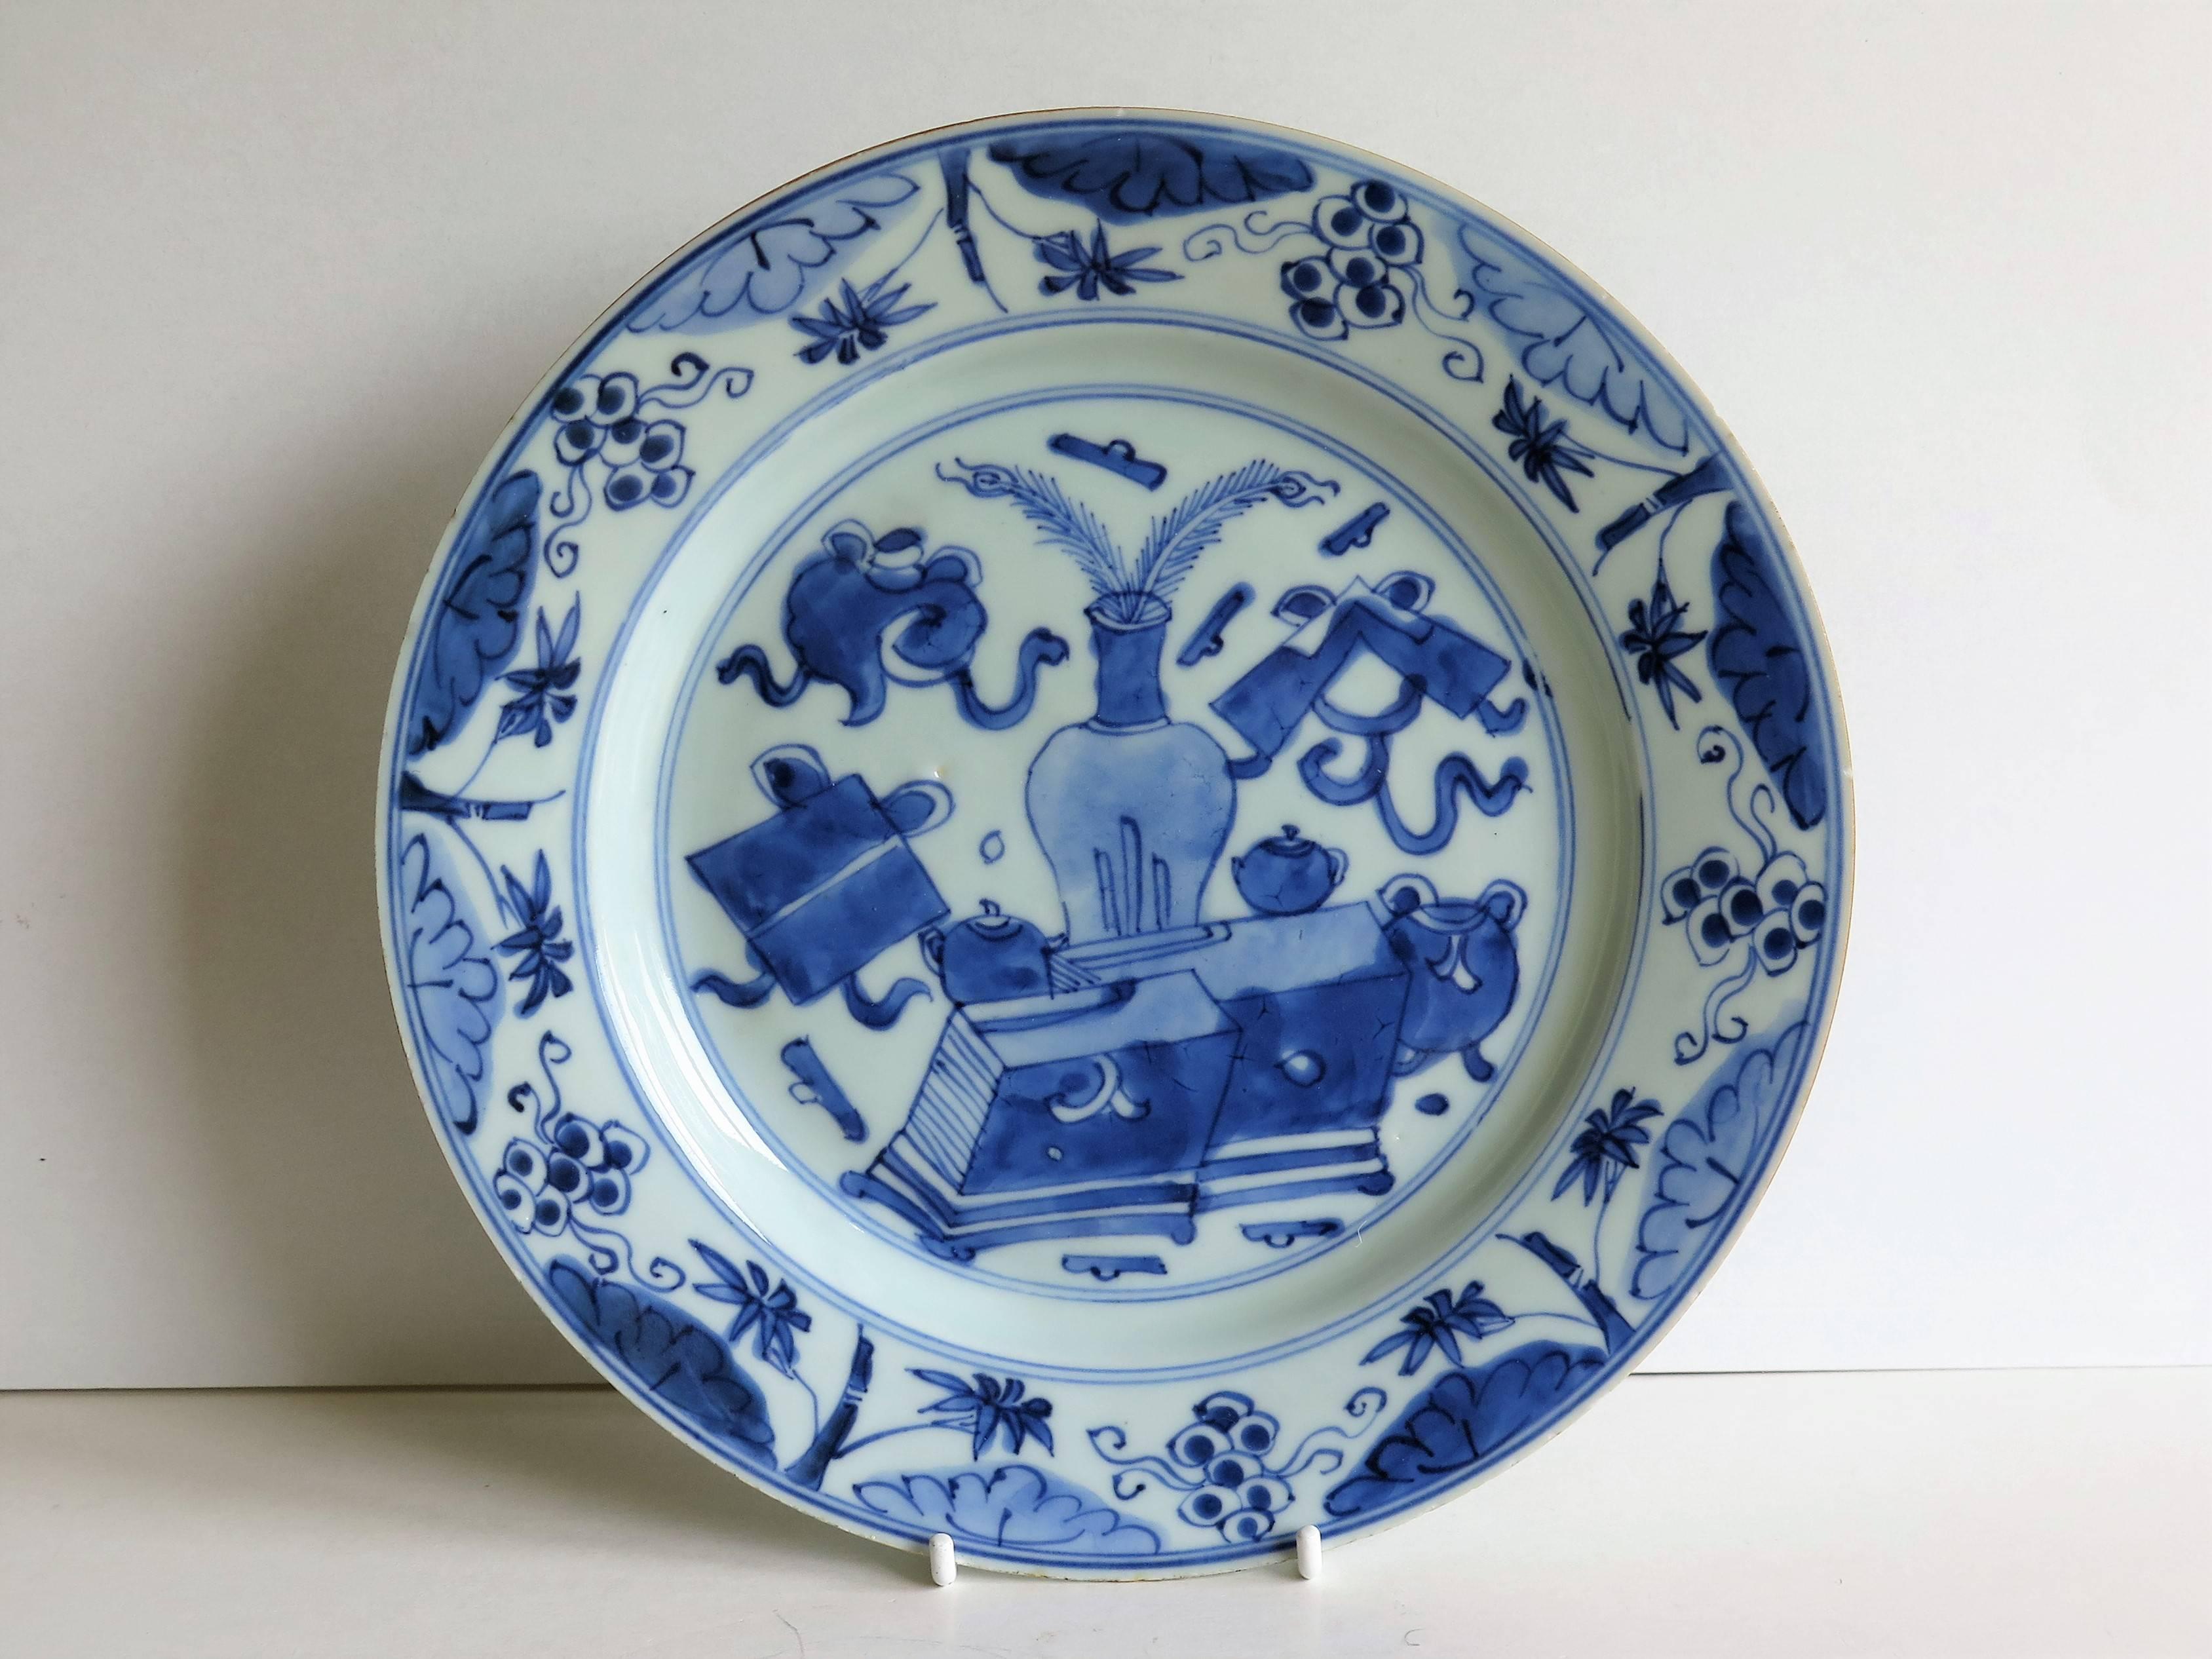 This is a beautiful hand-painted Chinese porcelain plate, dating to the early / mid-18th century, circa 1720-1750, Qing dynasty.

The plate is well potted, and has been hand decorated in varying shades of cobalt 'steel' blue. The glaze is thin and